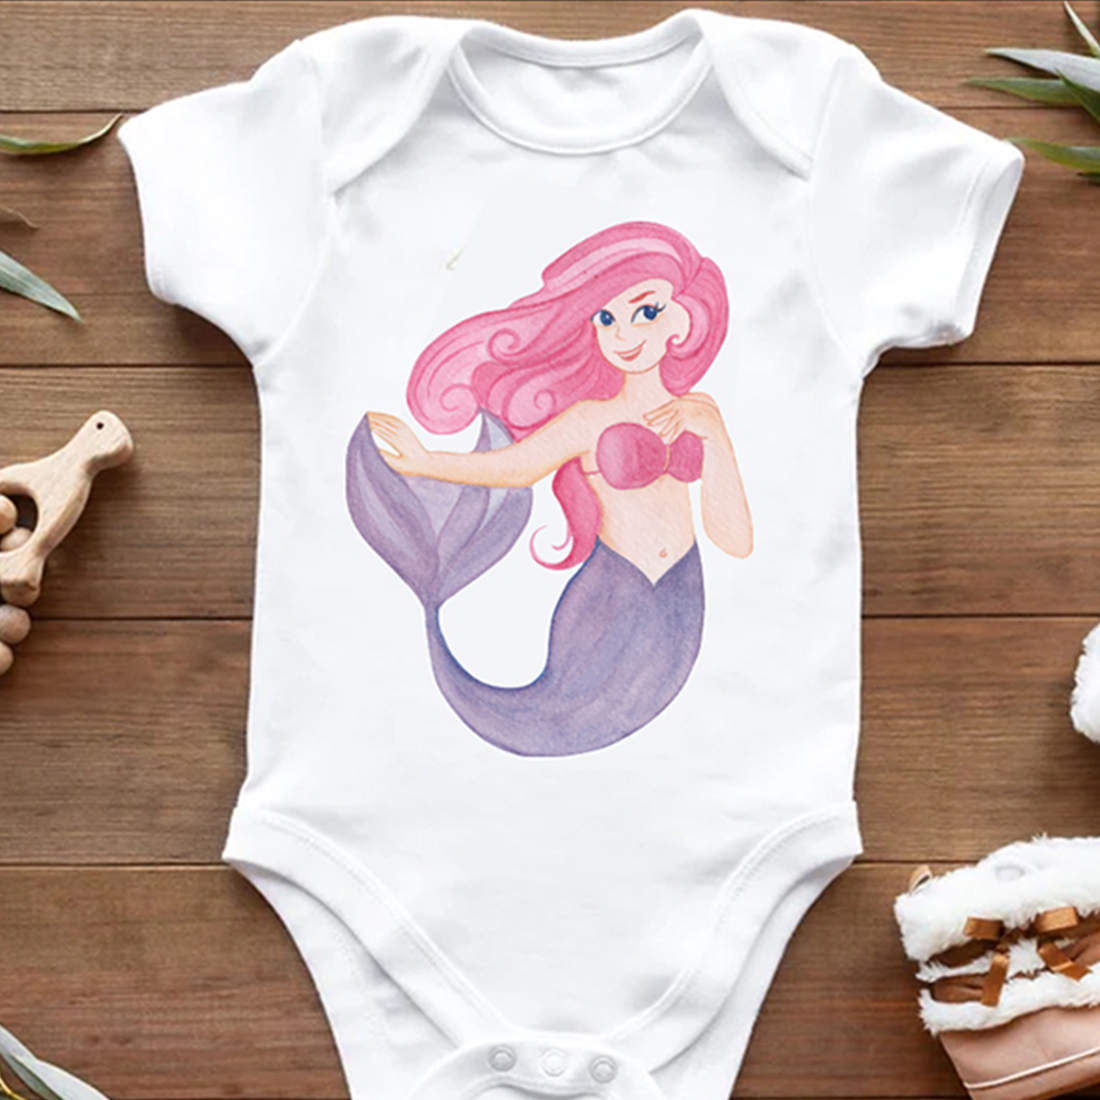 Image of childrens clothing with beautiful little mermaid print